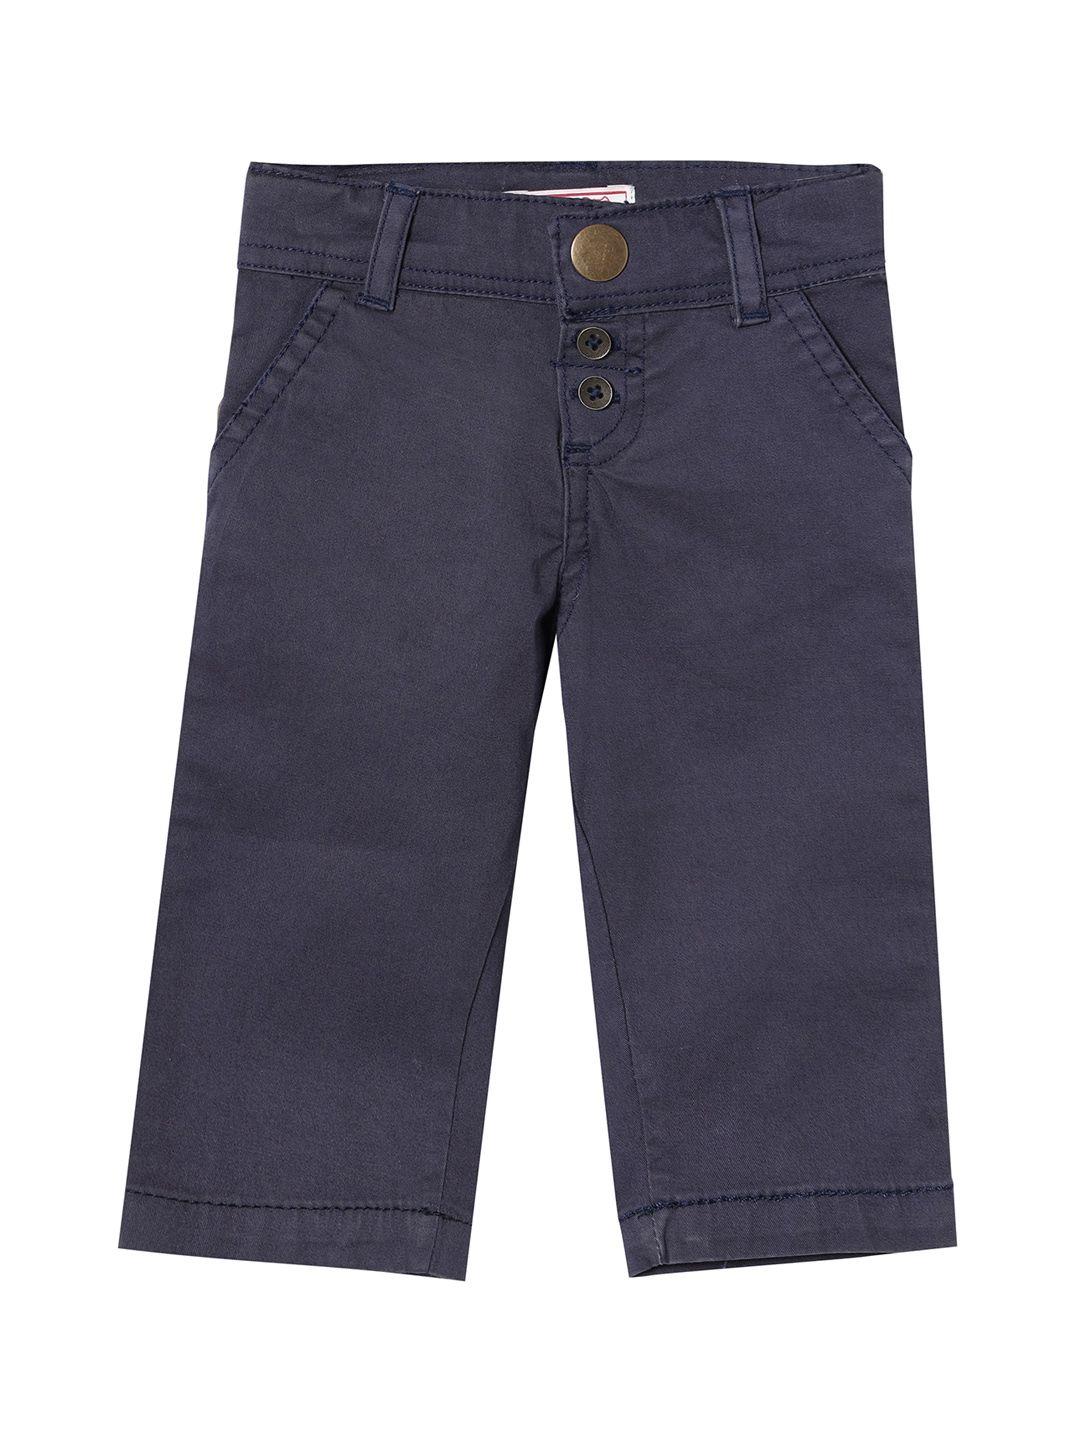 under fourteen only boys grey slim fit chinos trousers